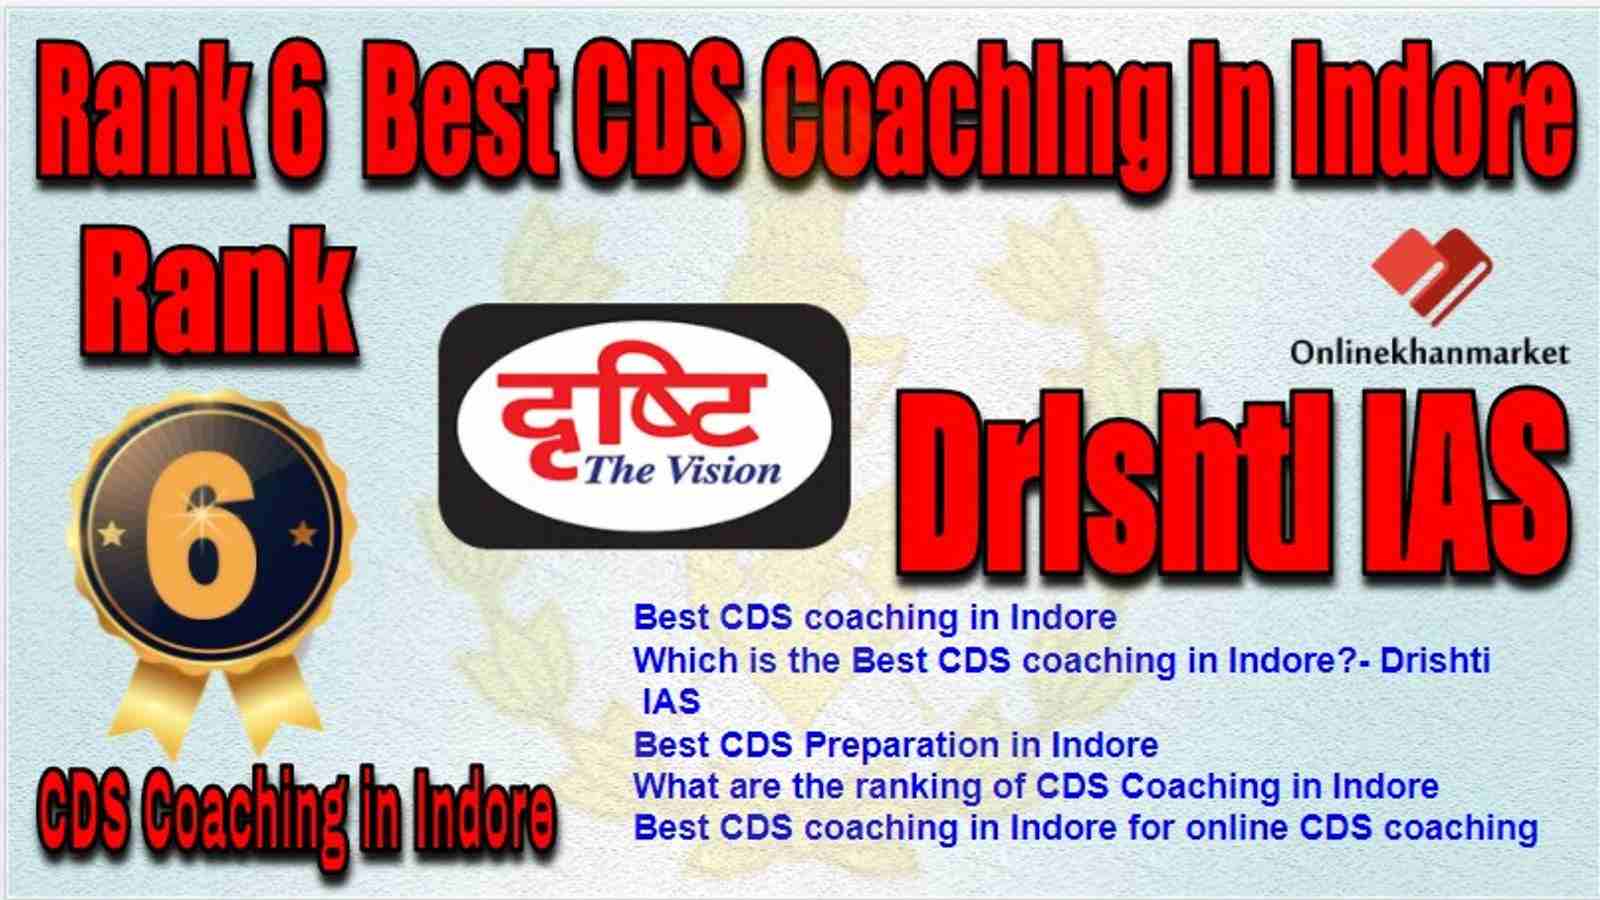 Rank 6 Best CDS Coaching in indore